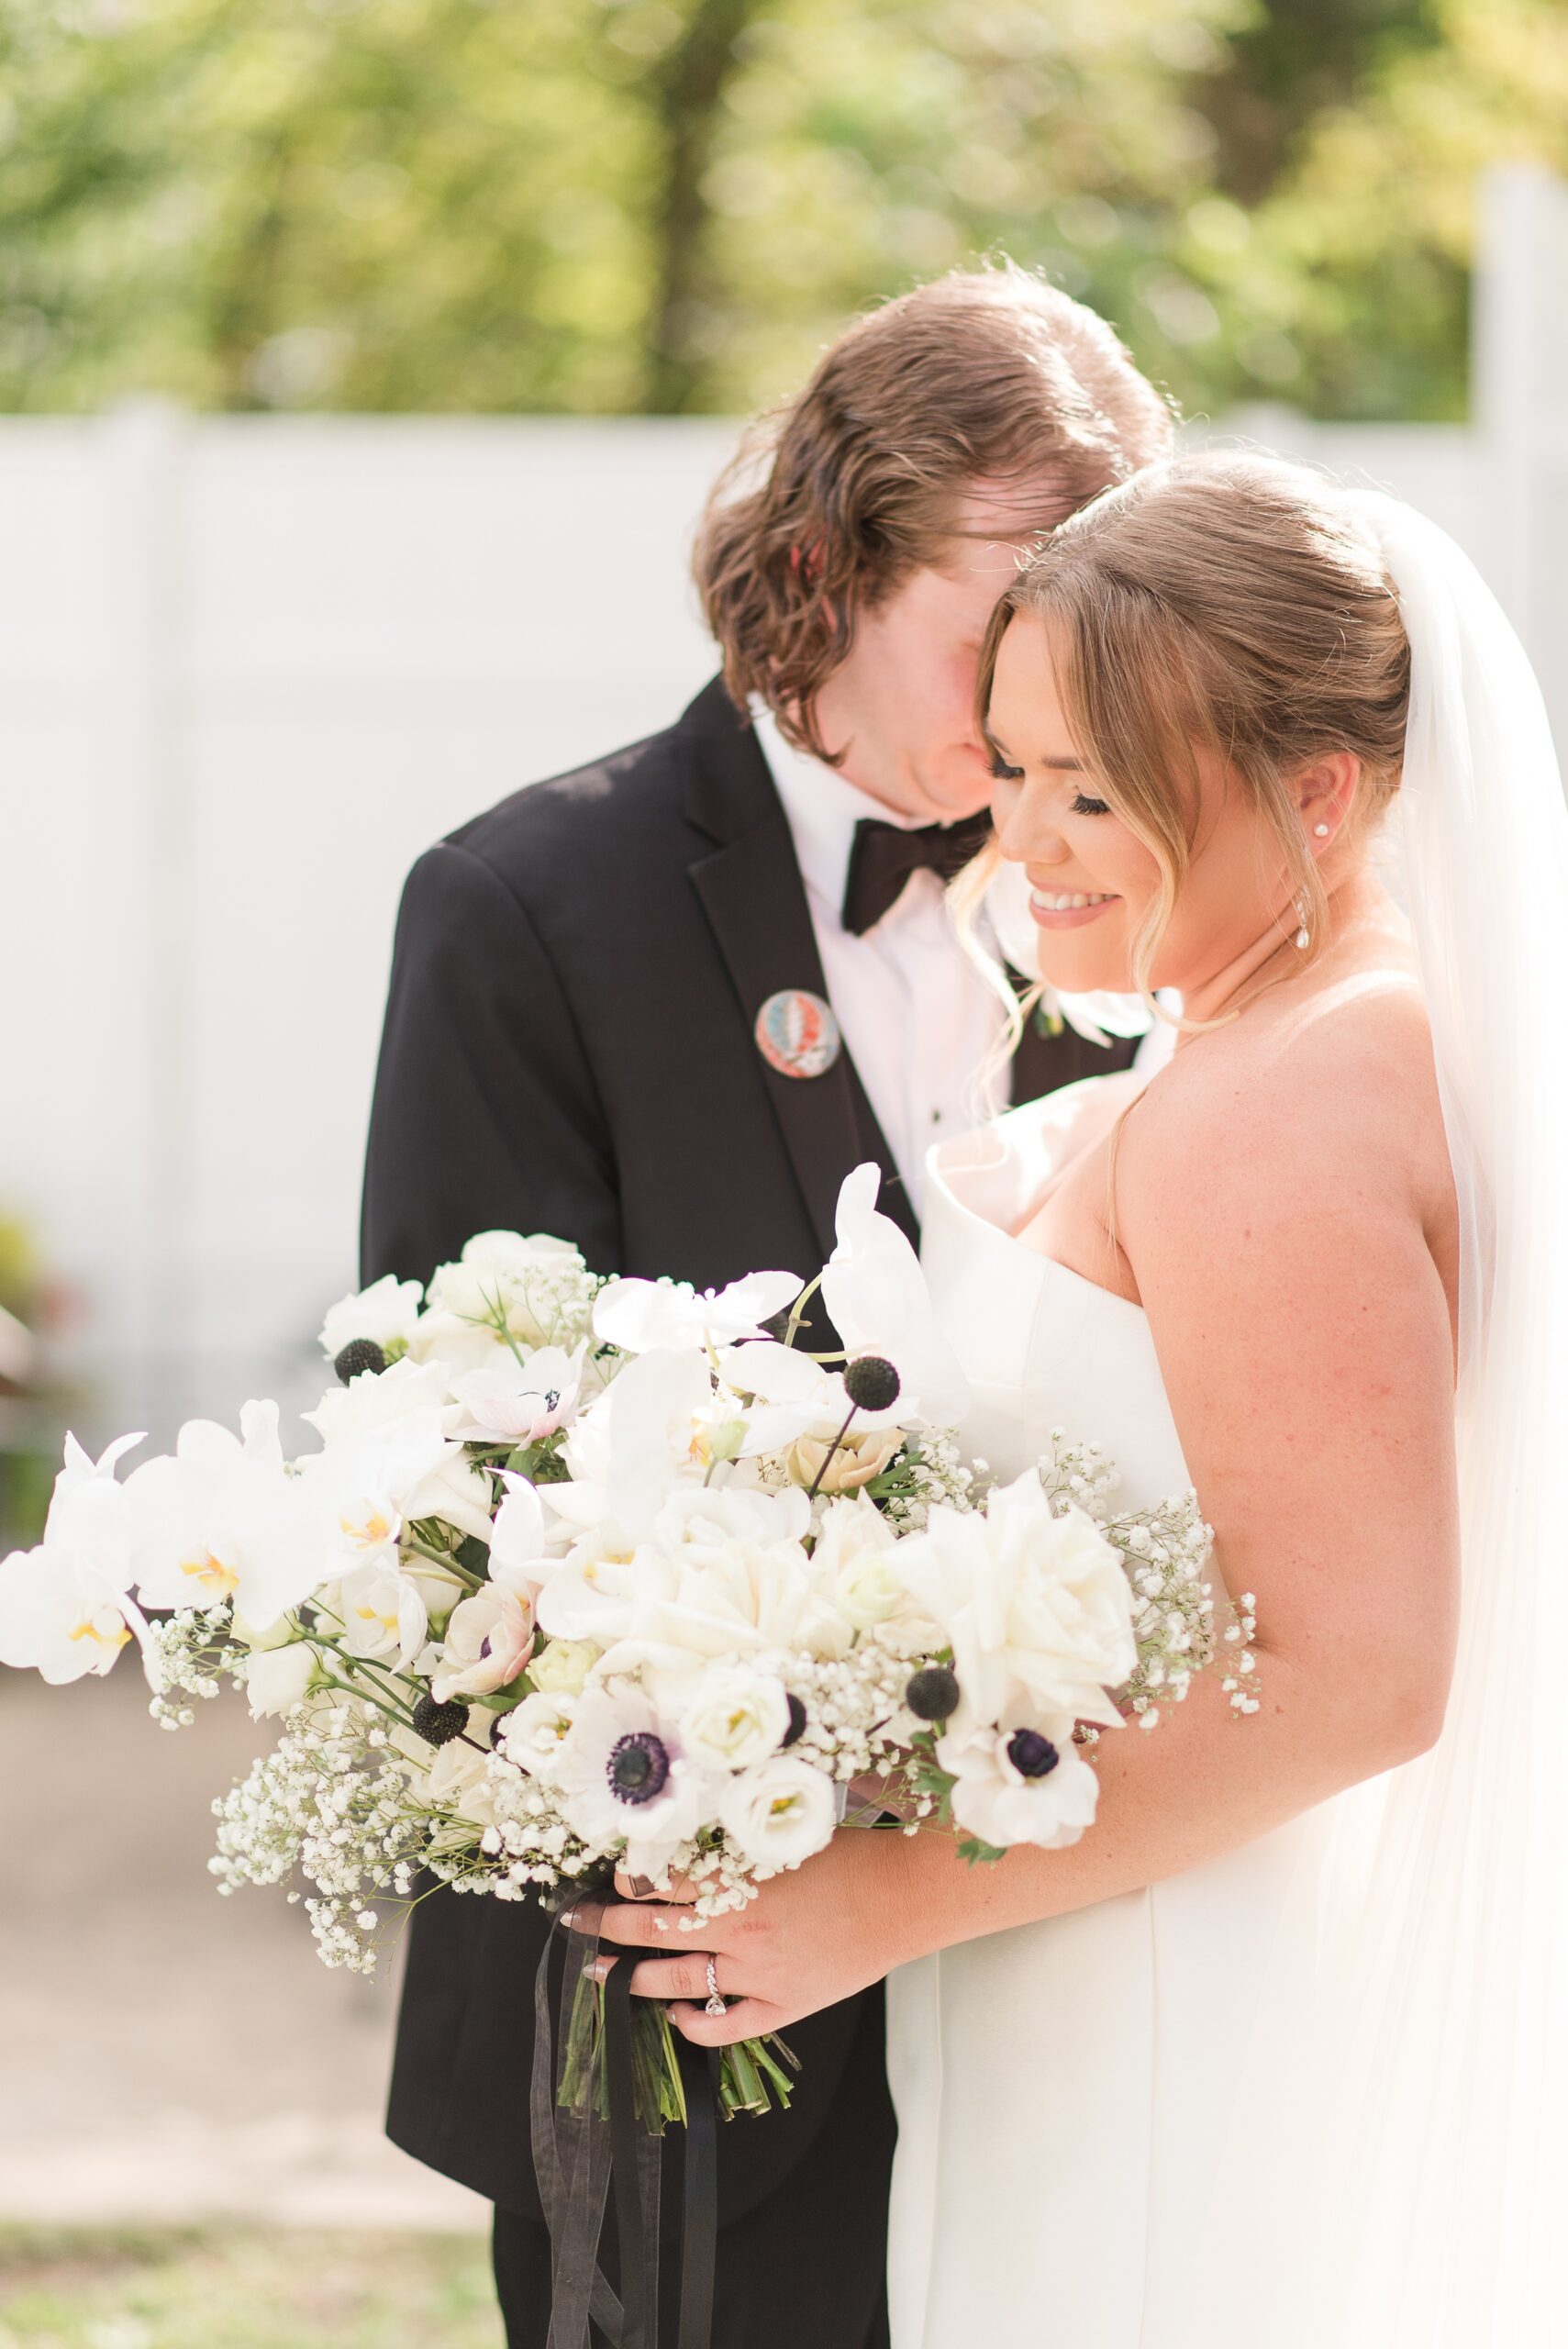 A bride smiles while standing with her groom and holding her white rose bouquet